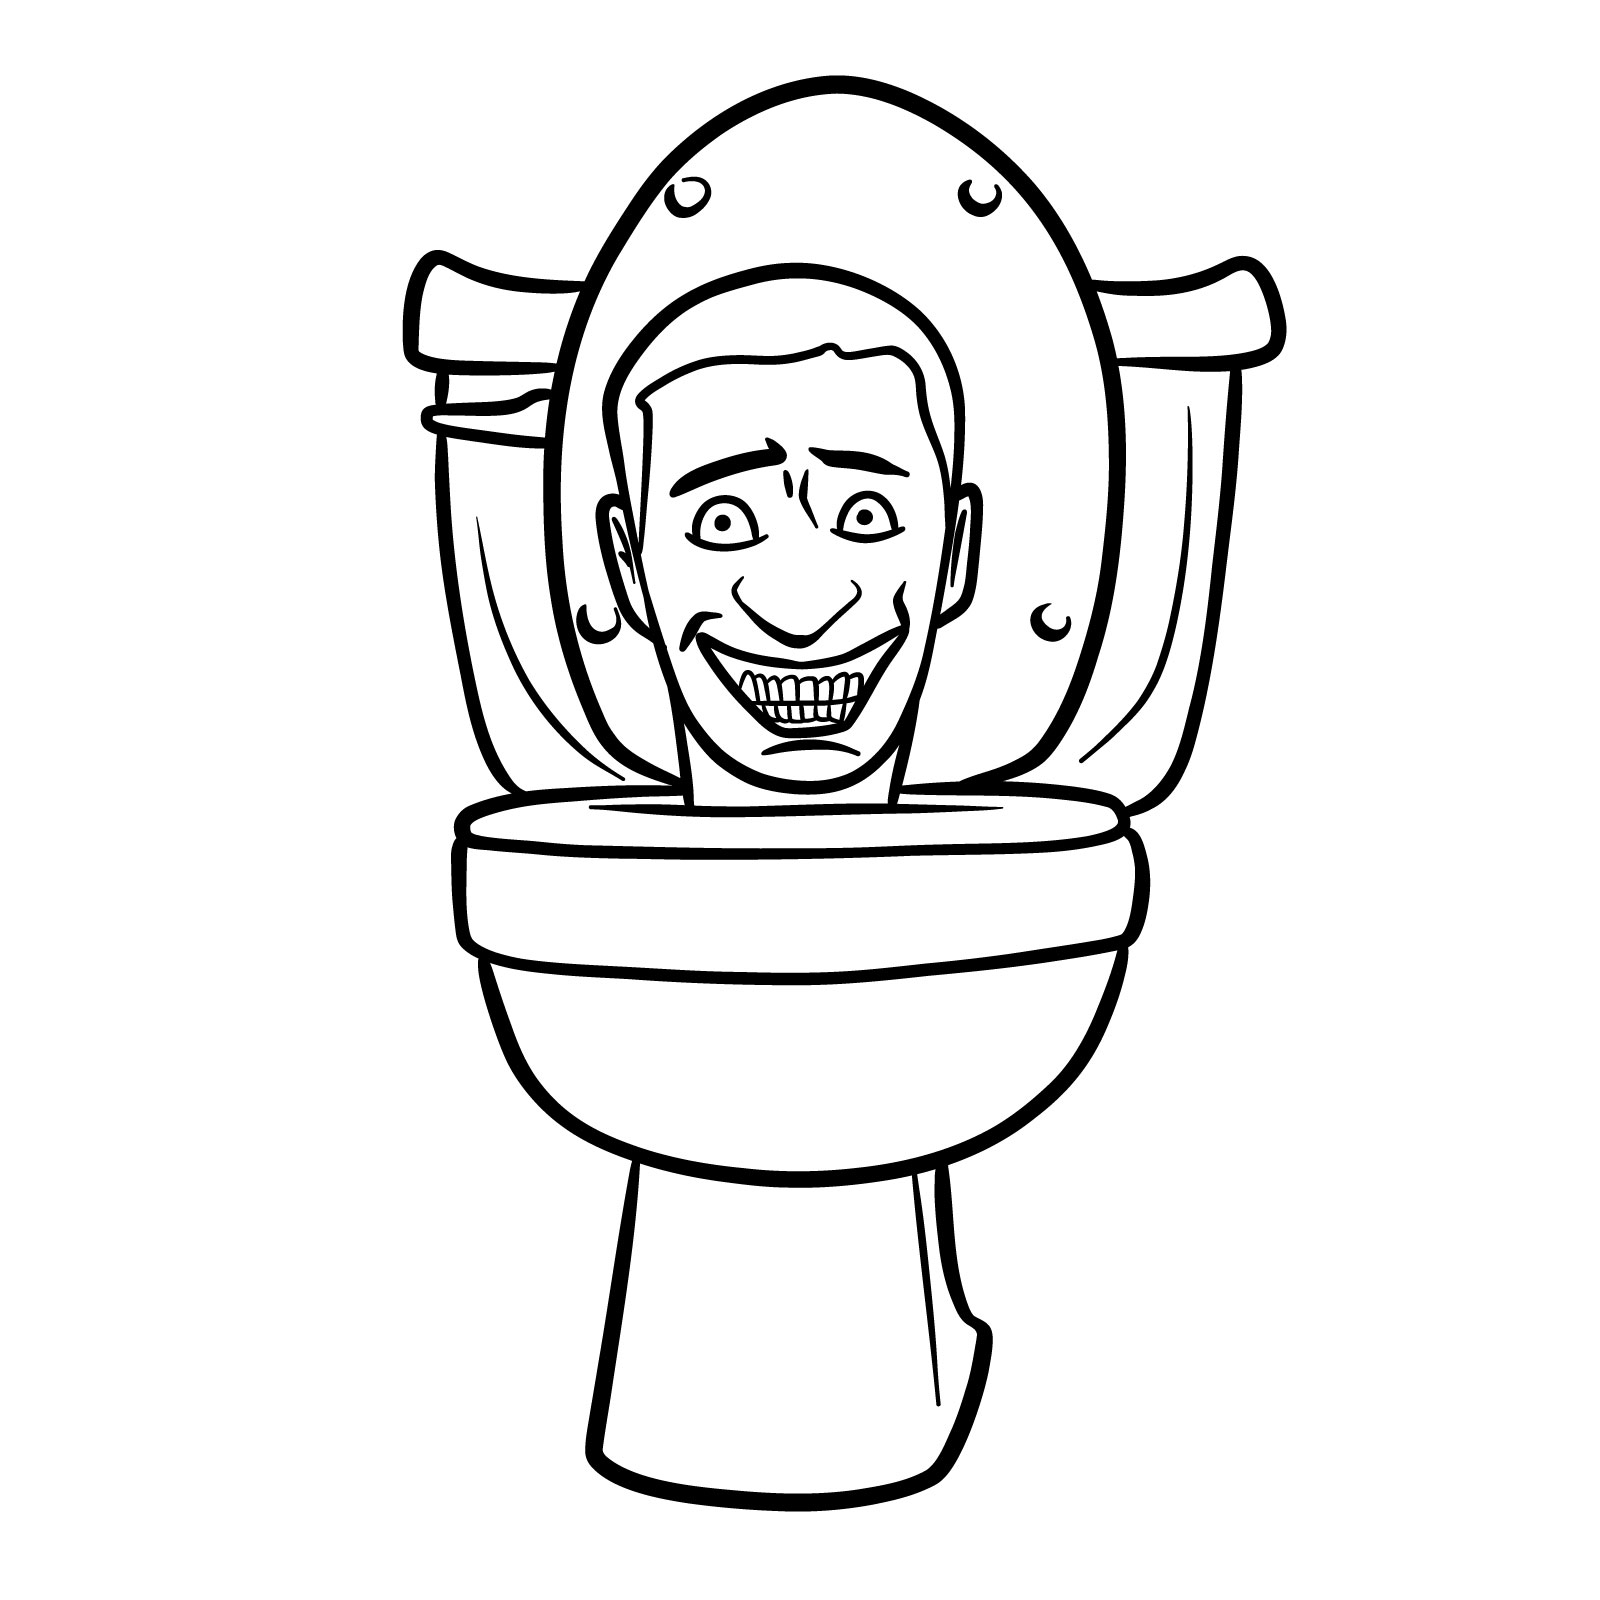 Finalized Skibidi Toilet drawing, suitable for coloring - final step